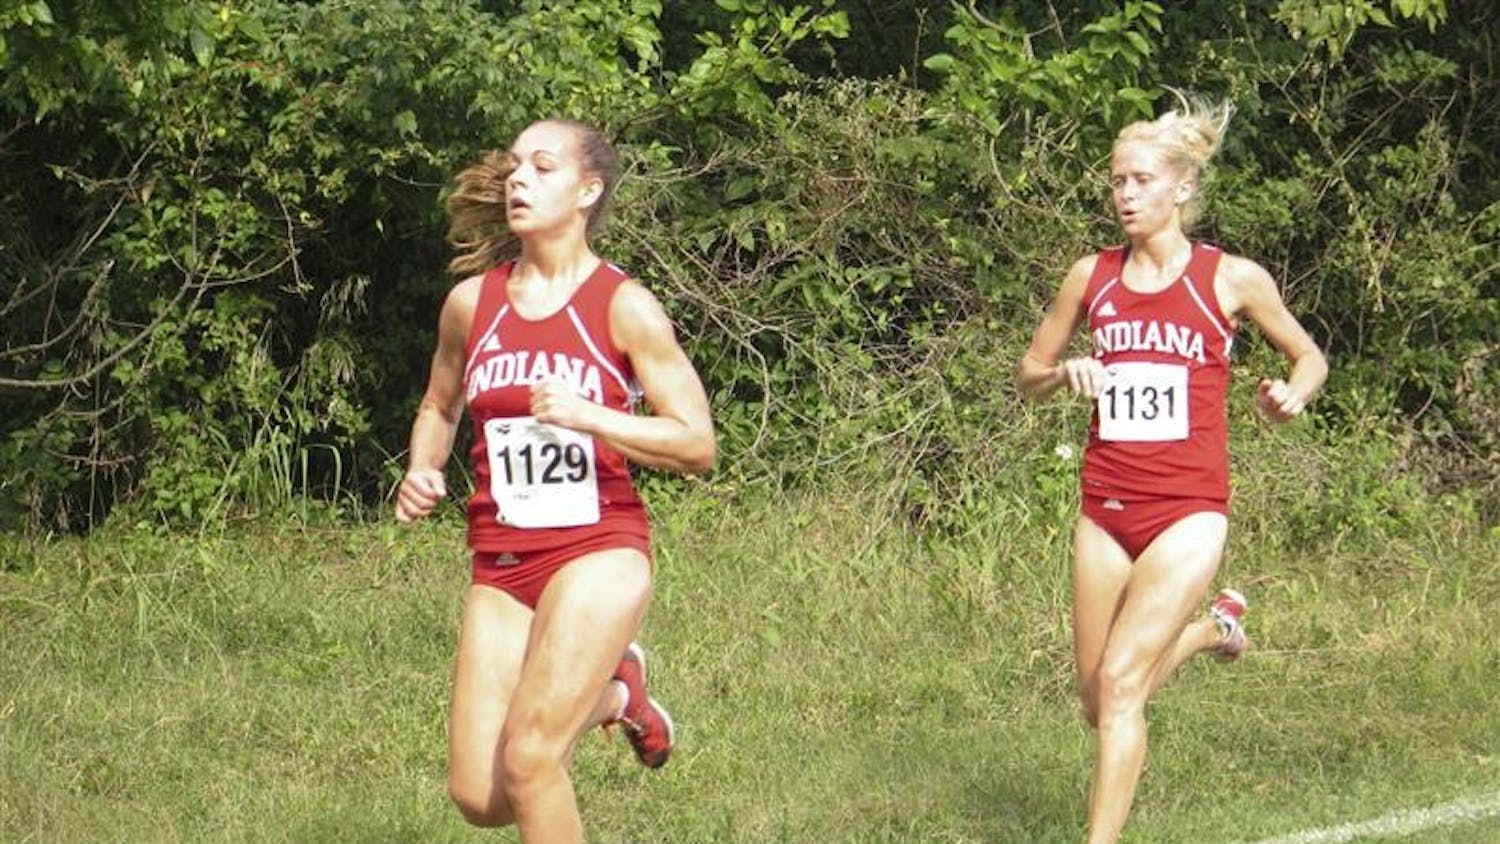 Sophomore Sarah Pease leads teammate senior Kristina Trcka in the 27th Annual Indiana Intercollegiates meet Friday at the IU course. Pease and Trcka finished 5th and 8th respectively to help the team to a second place finish.